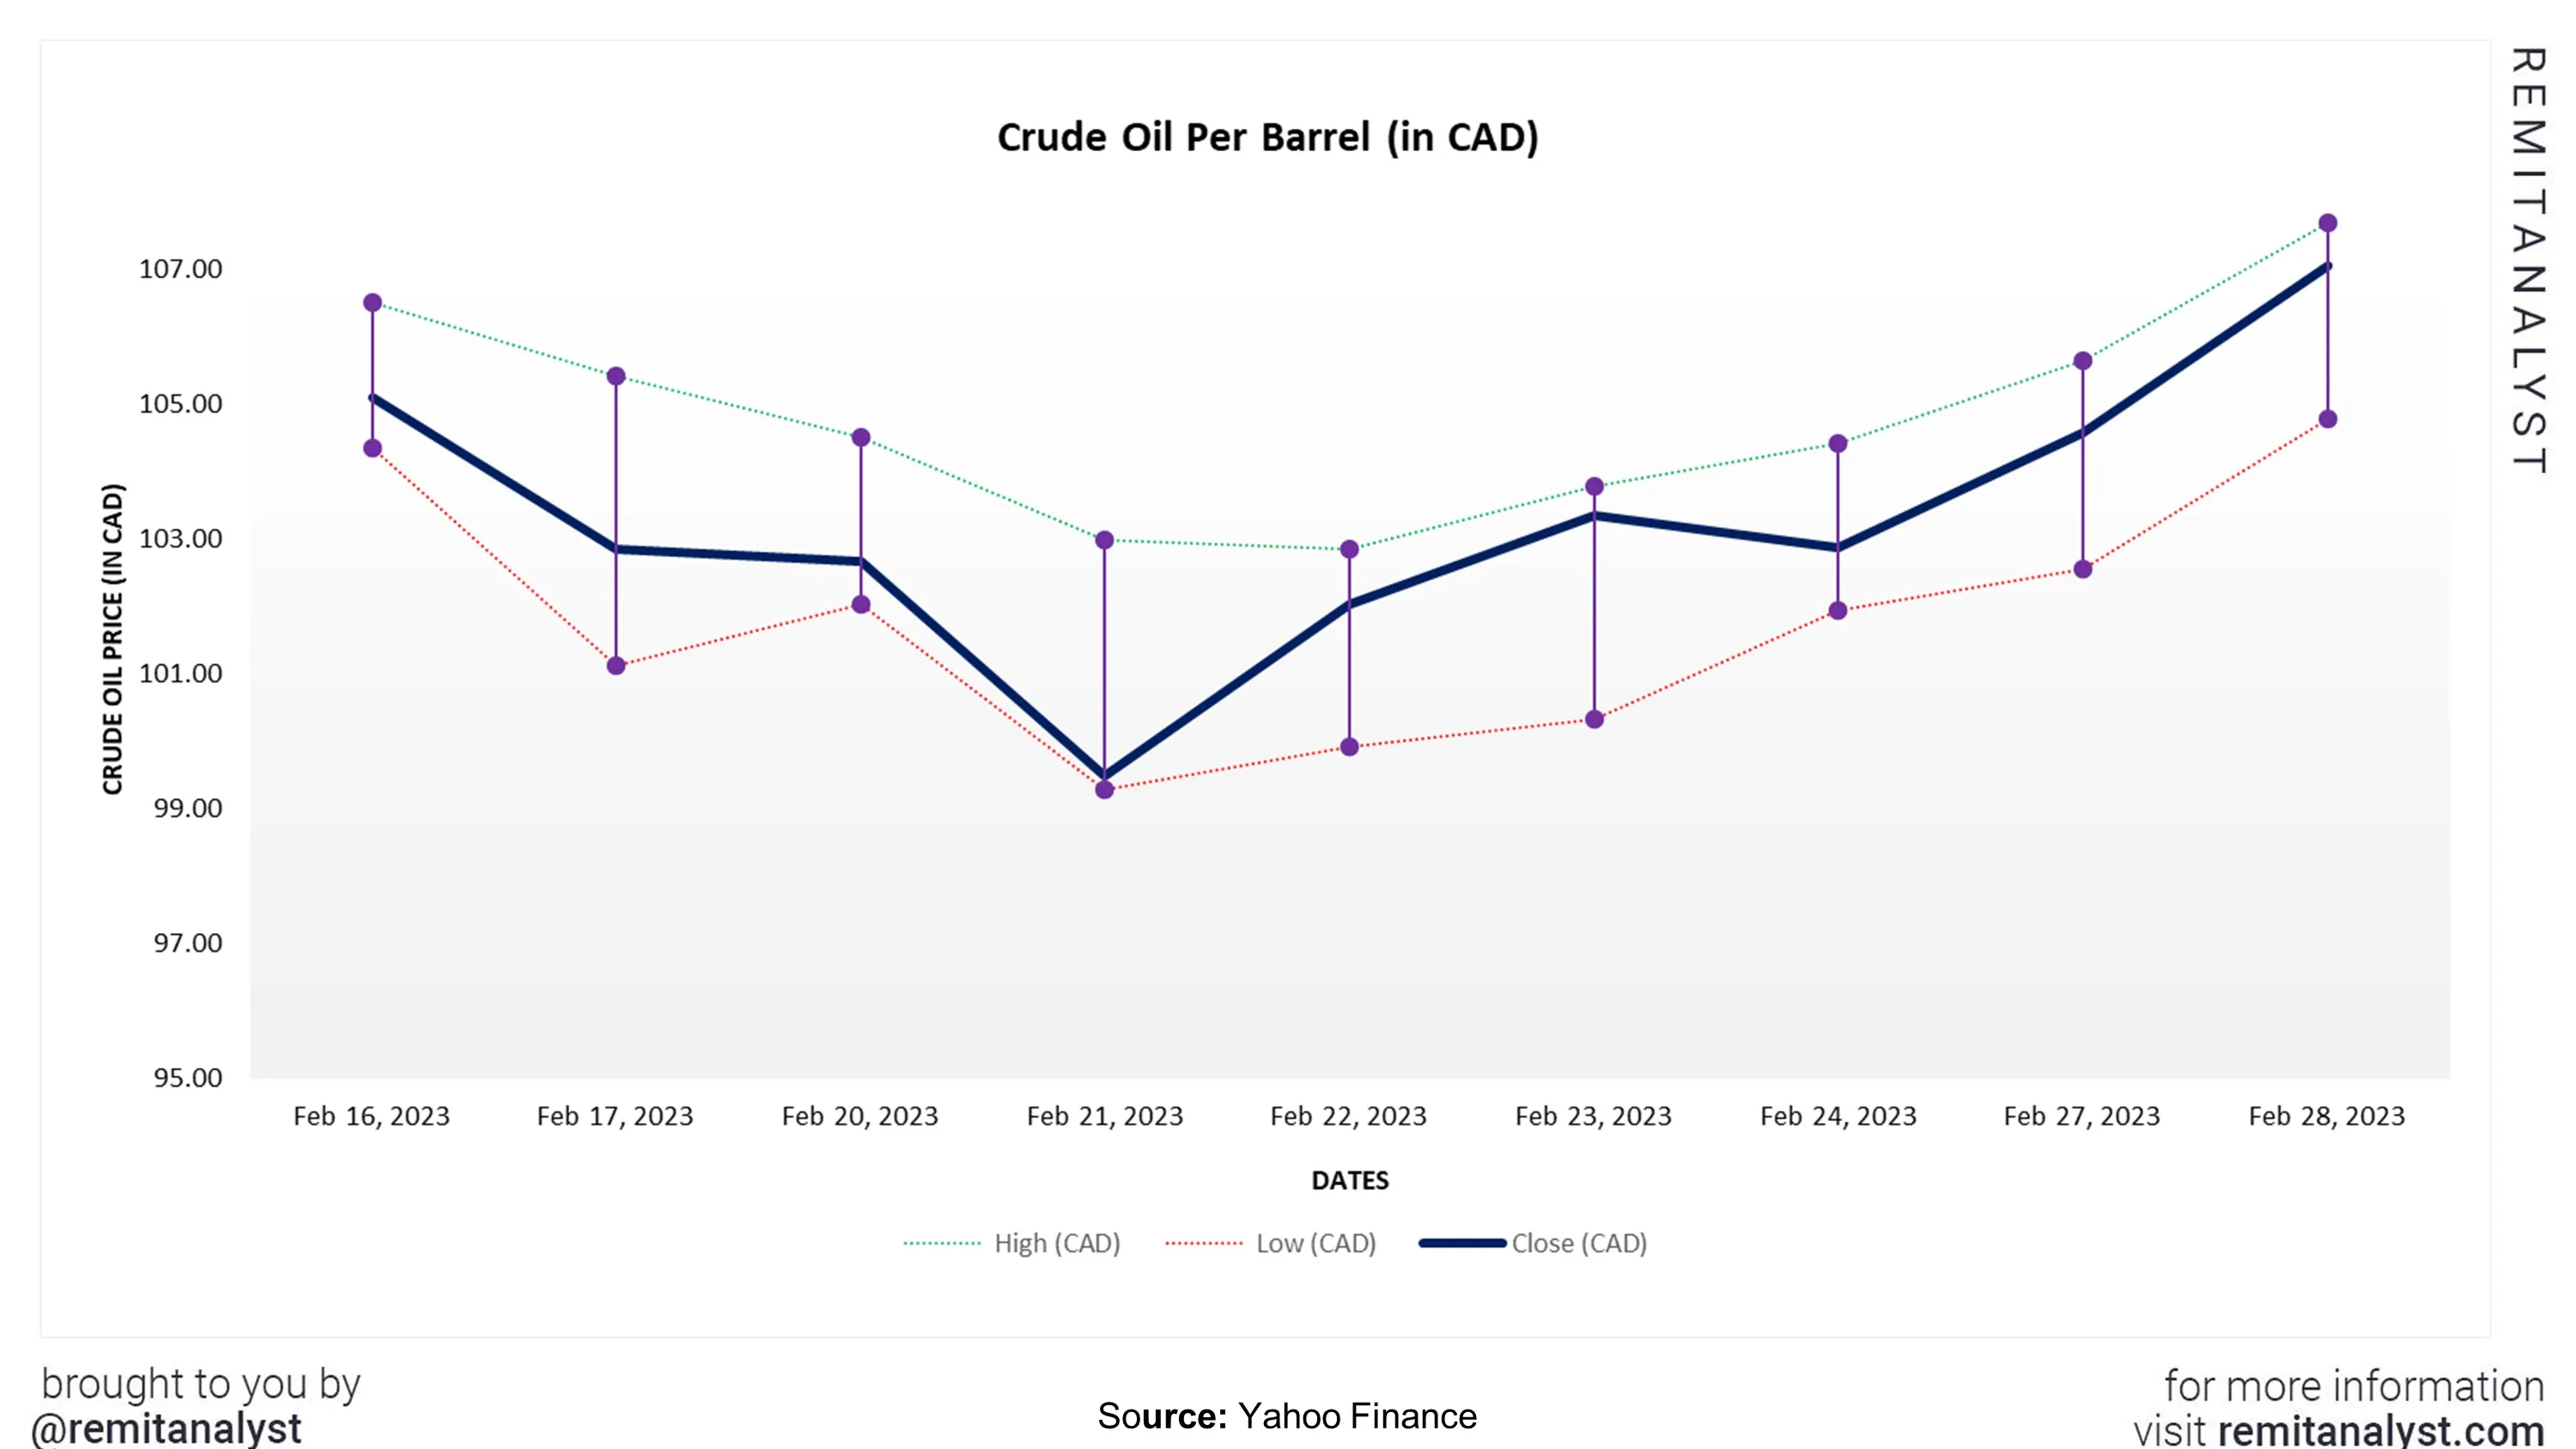 crude-oil-prices-canada-from-16-feb-2023-to-28-feb-2023